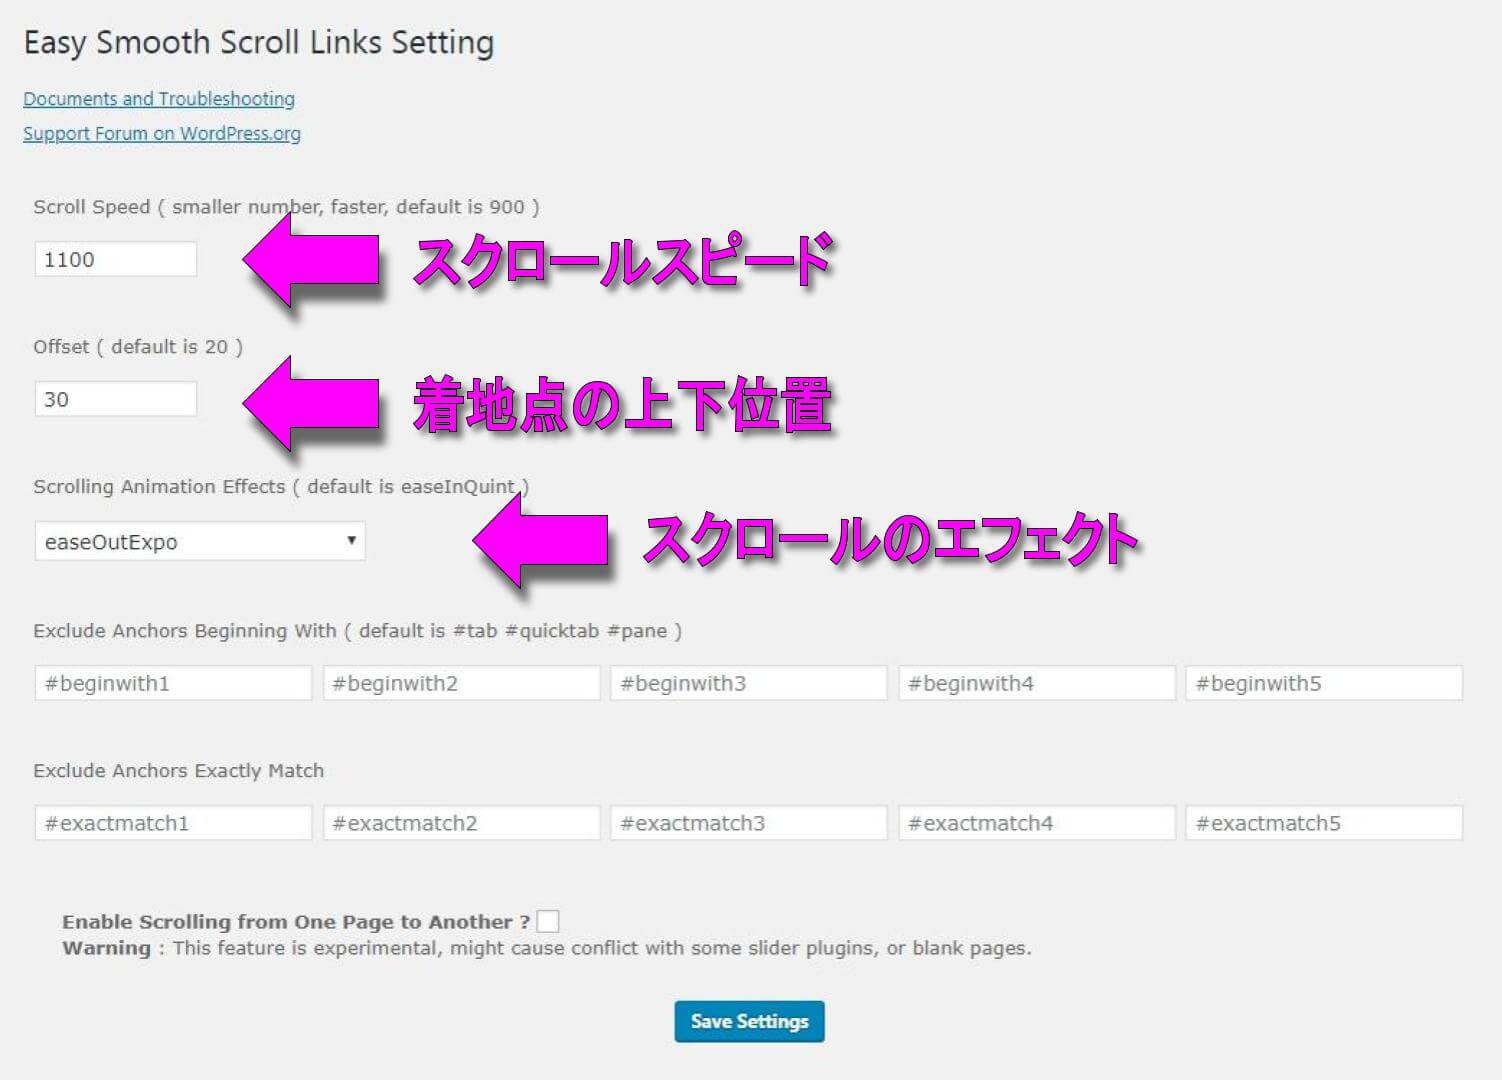 Easy Smooth Scroll Links Setting